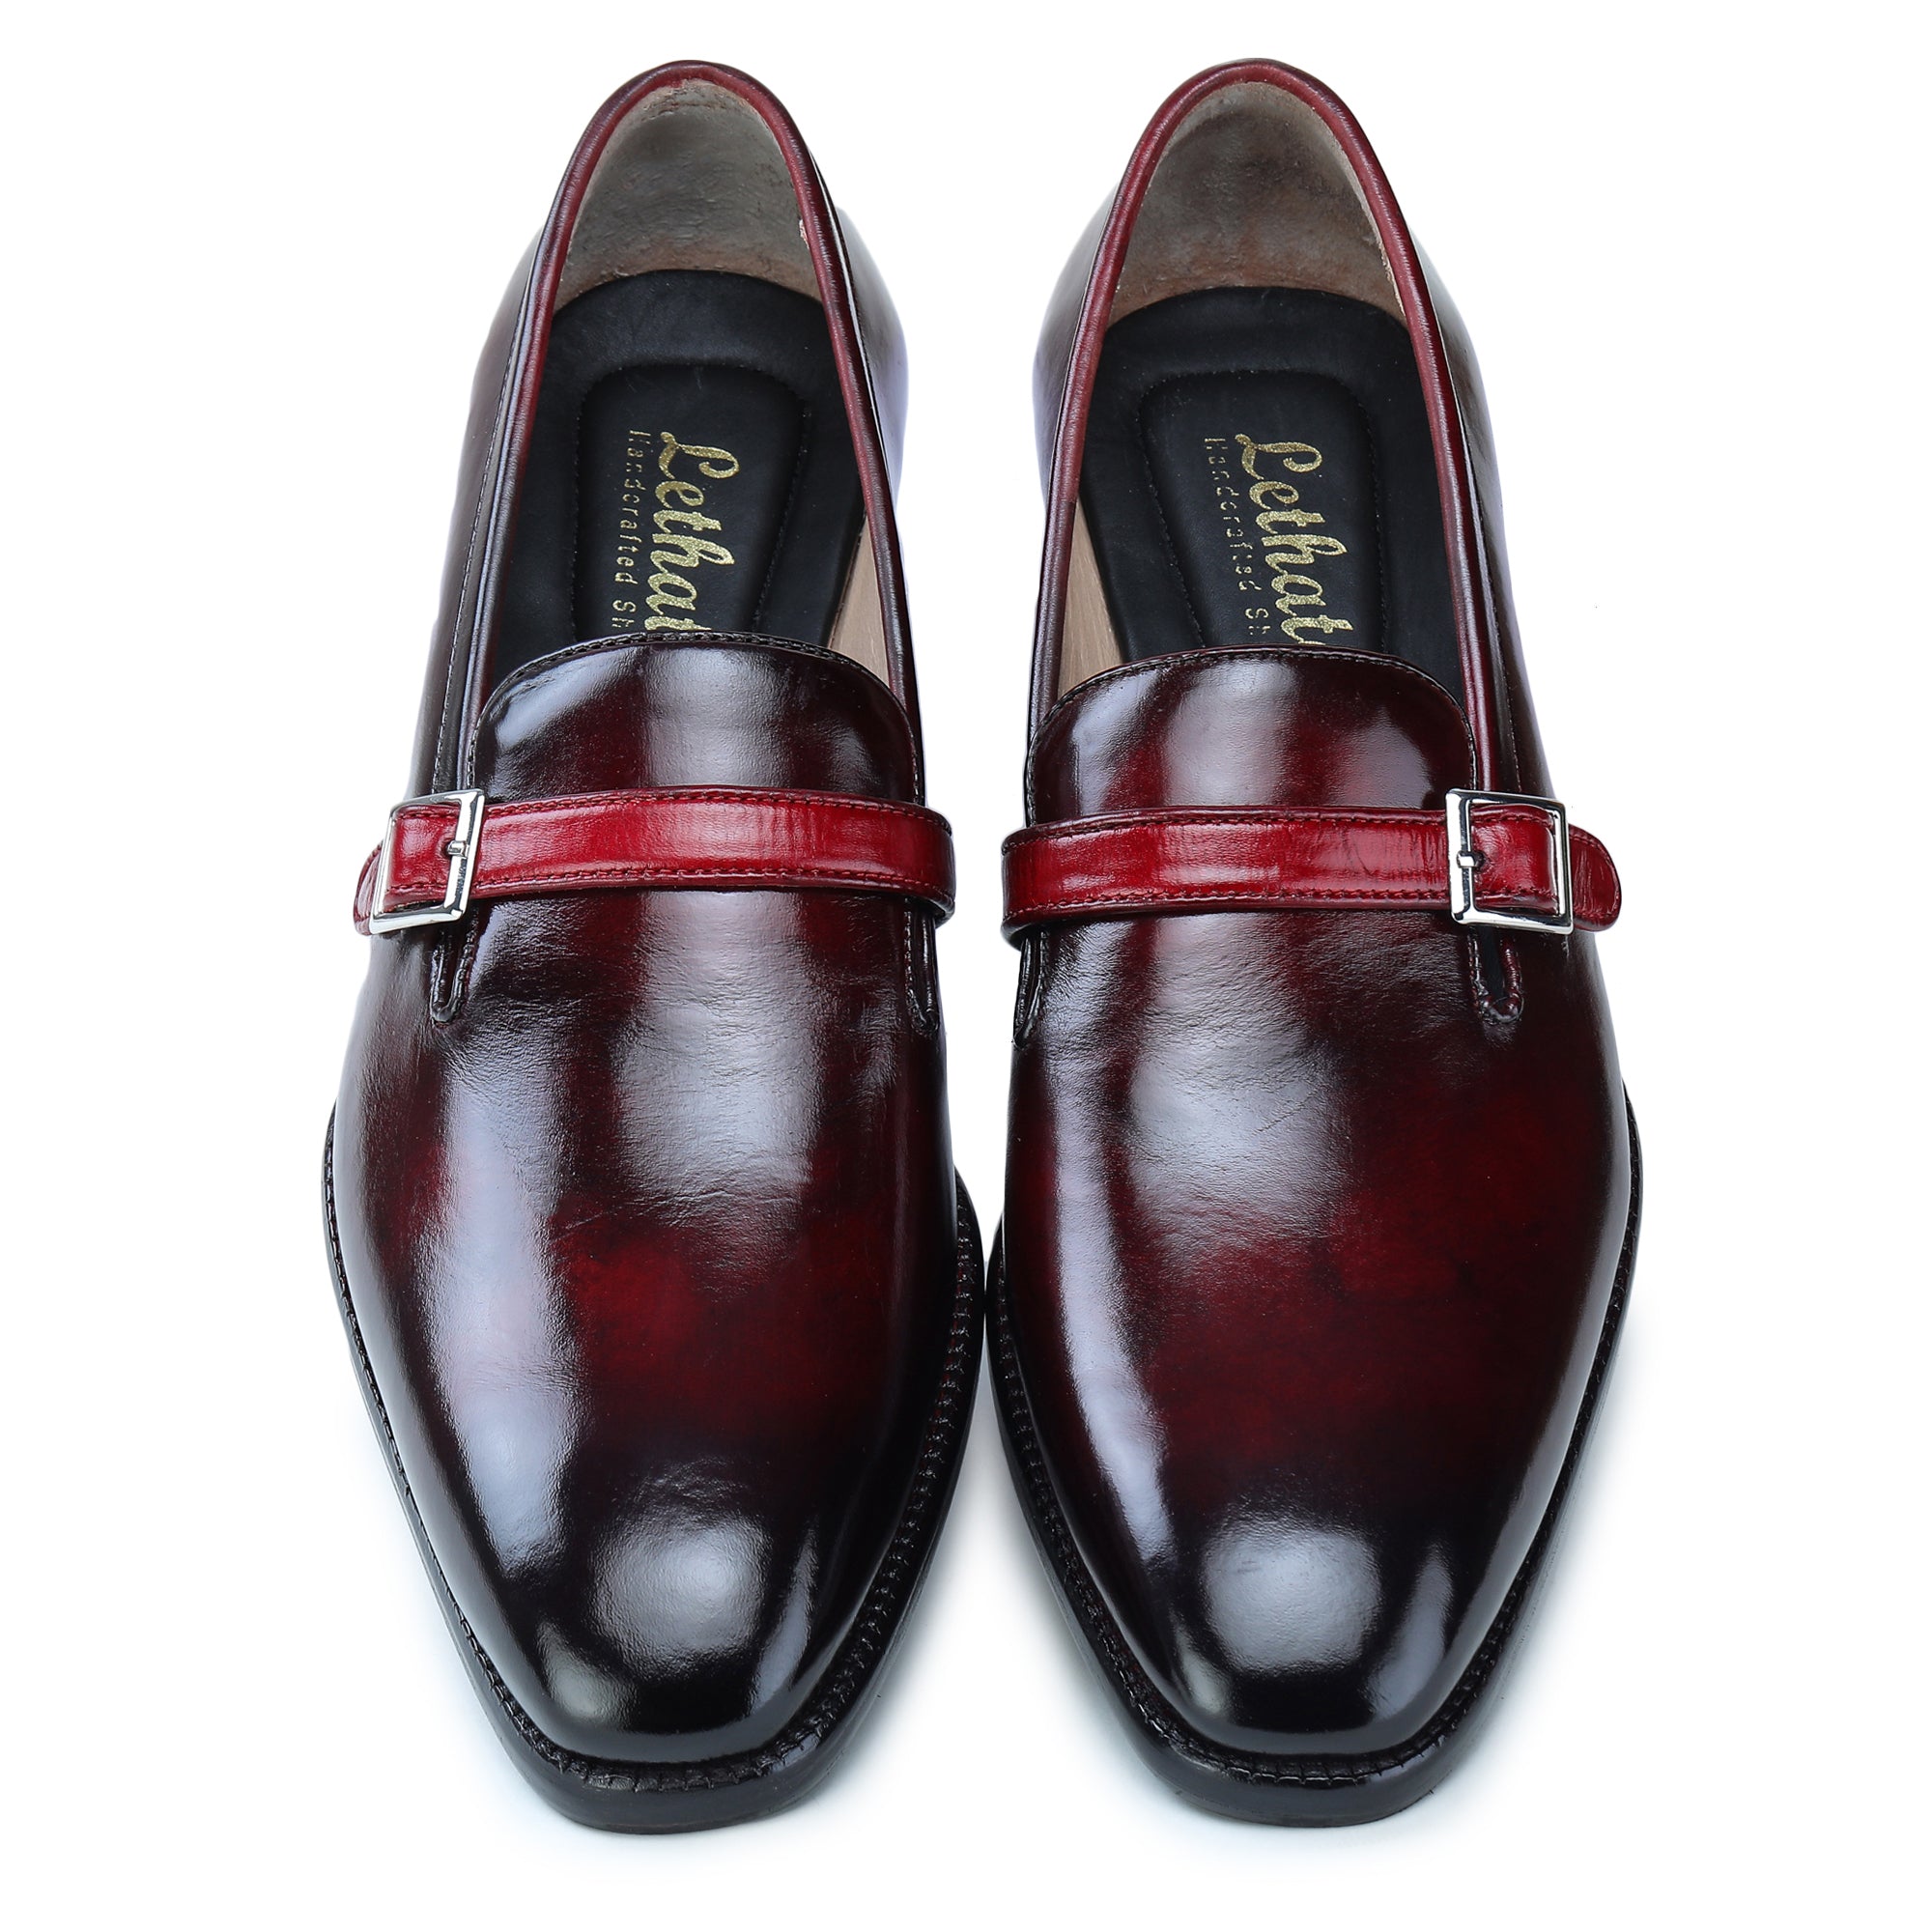 Men's Single Monk Strap Loafers - Wine Red by Lethato